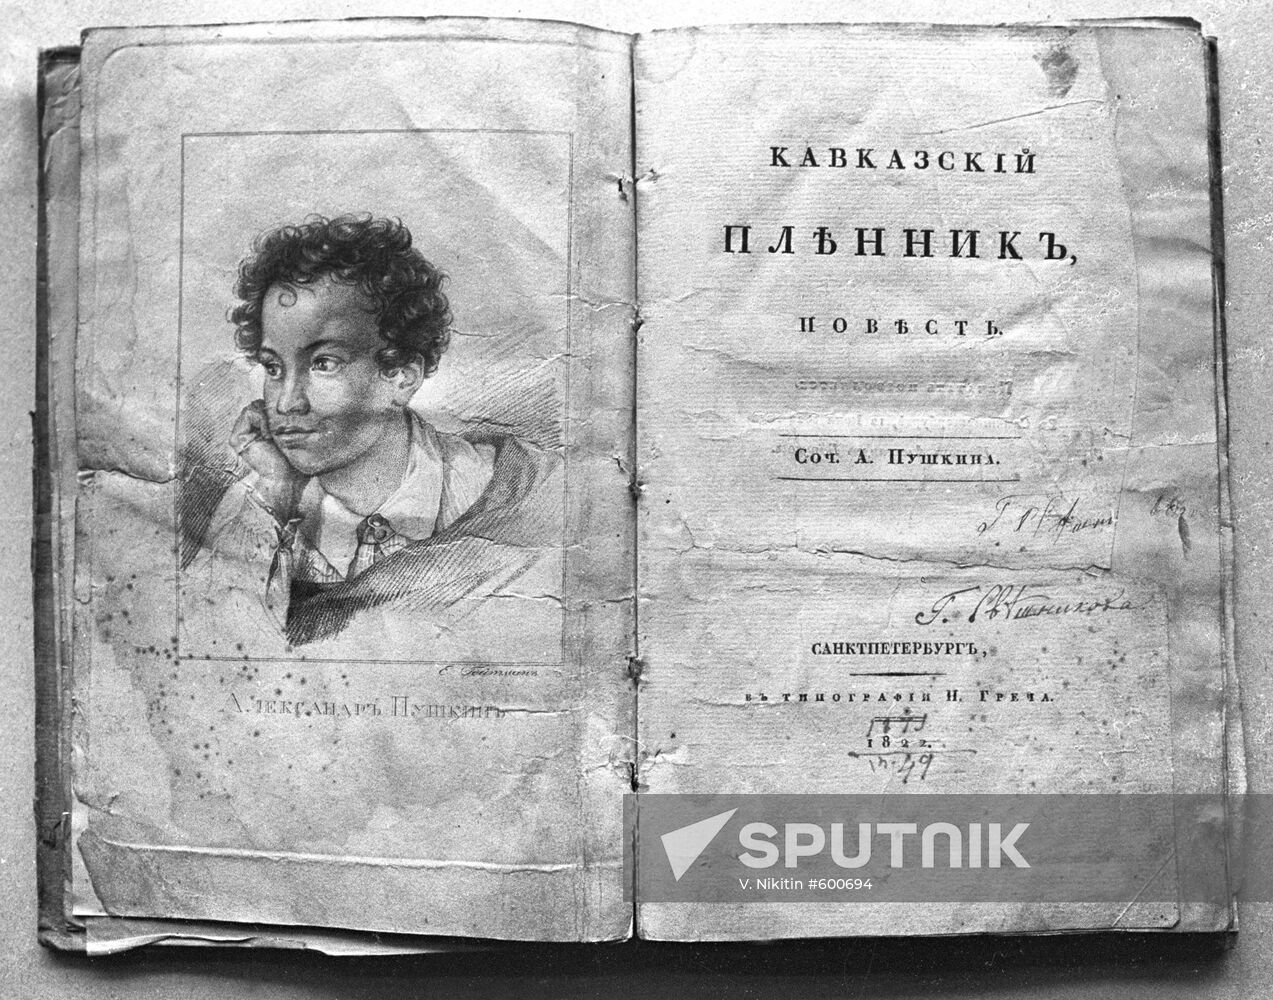 First edition of A. Pushkin's "The Prisoner of Caucasus"